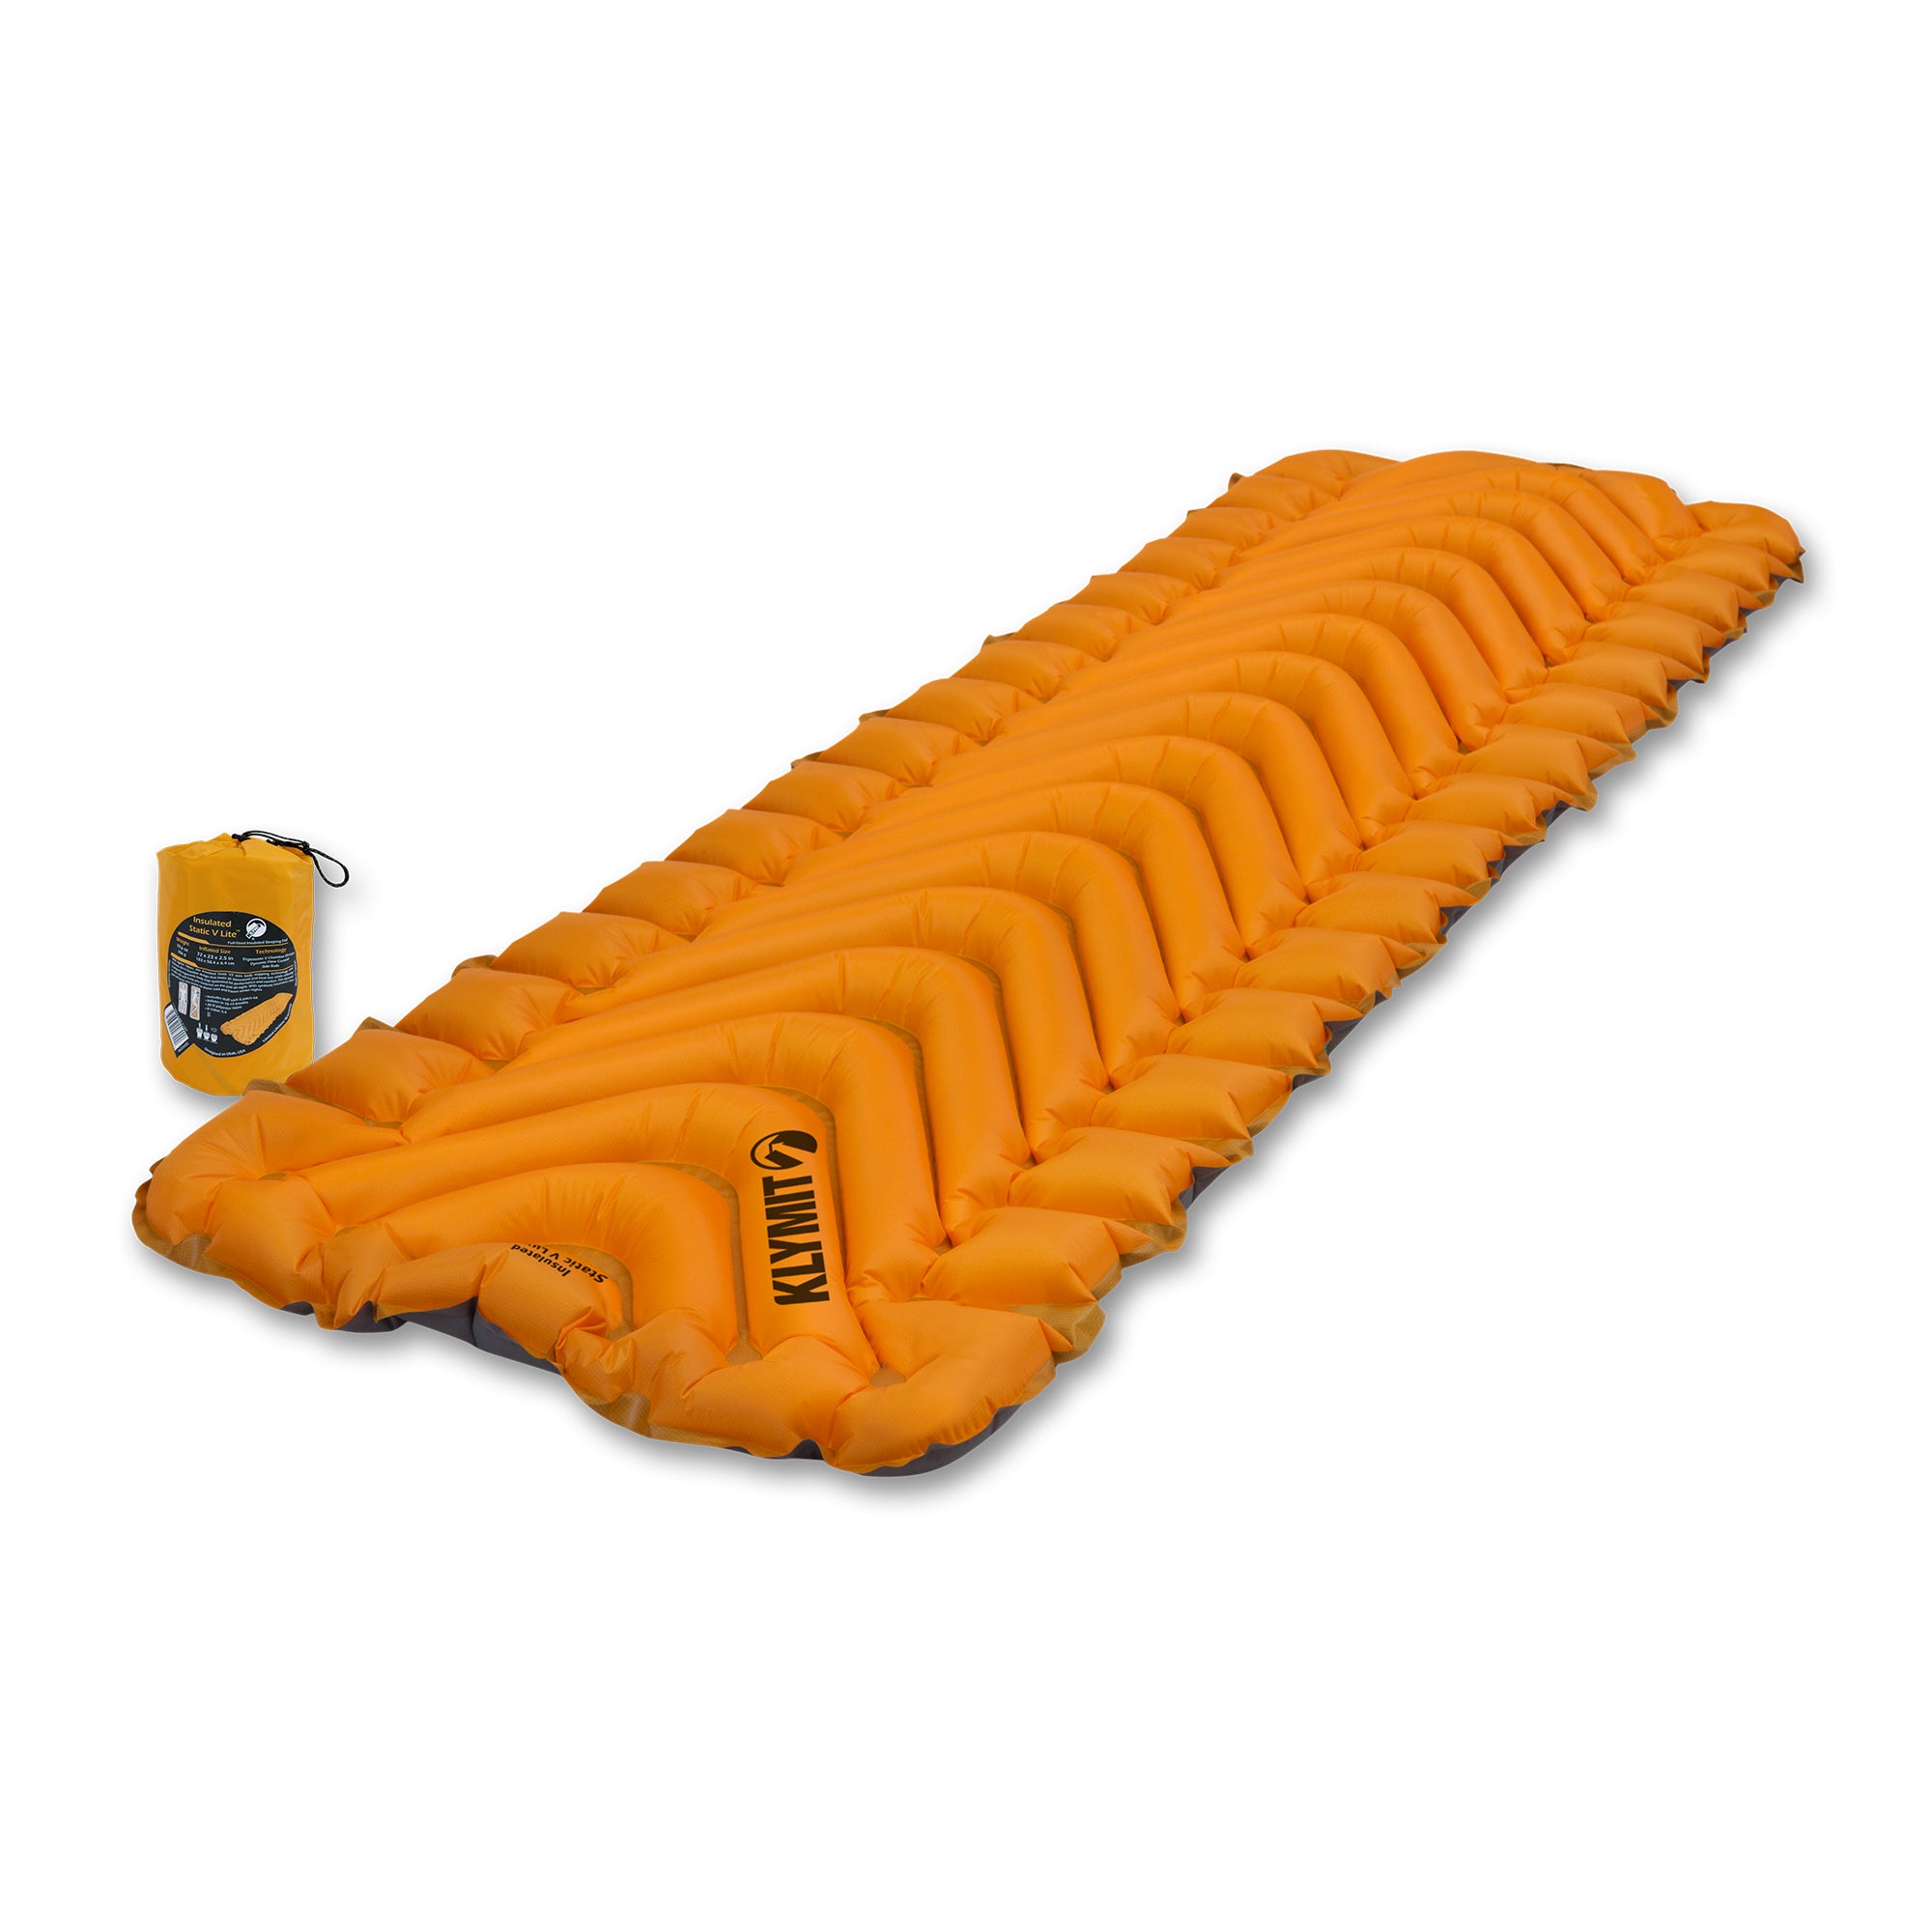 A rectangular orange inflatable Insulated Static V Lite sleeping pad with v shaped pattern shown at and angle on the ground with its stuff sack next to it.